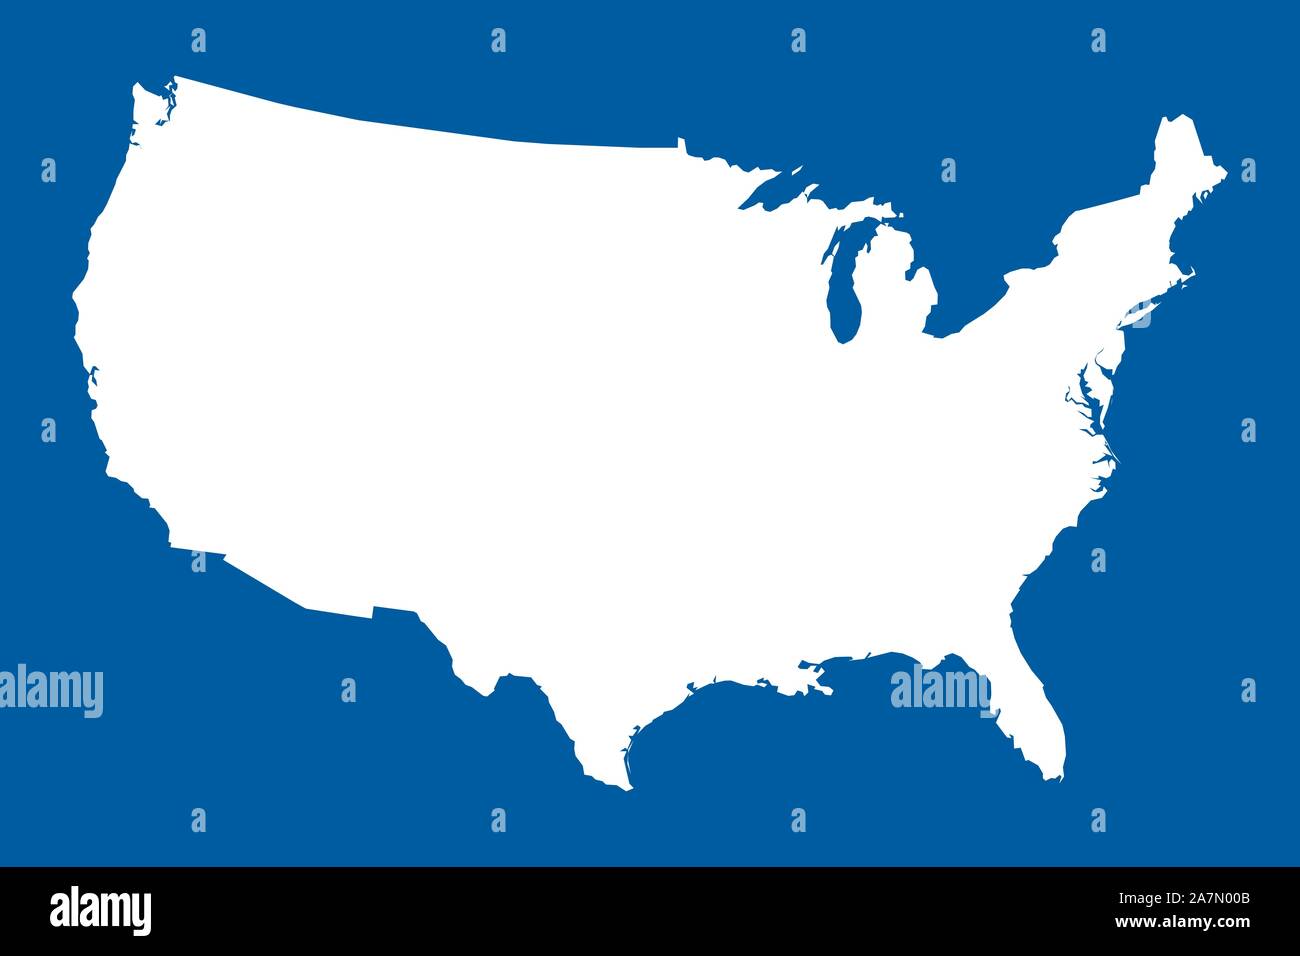 US map mainland vector illustration. Blue white. United states north american country. Stock Vector